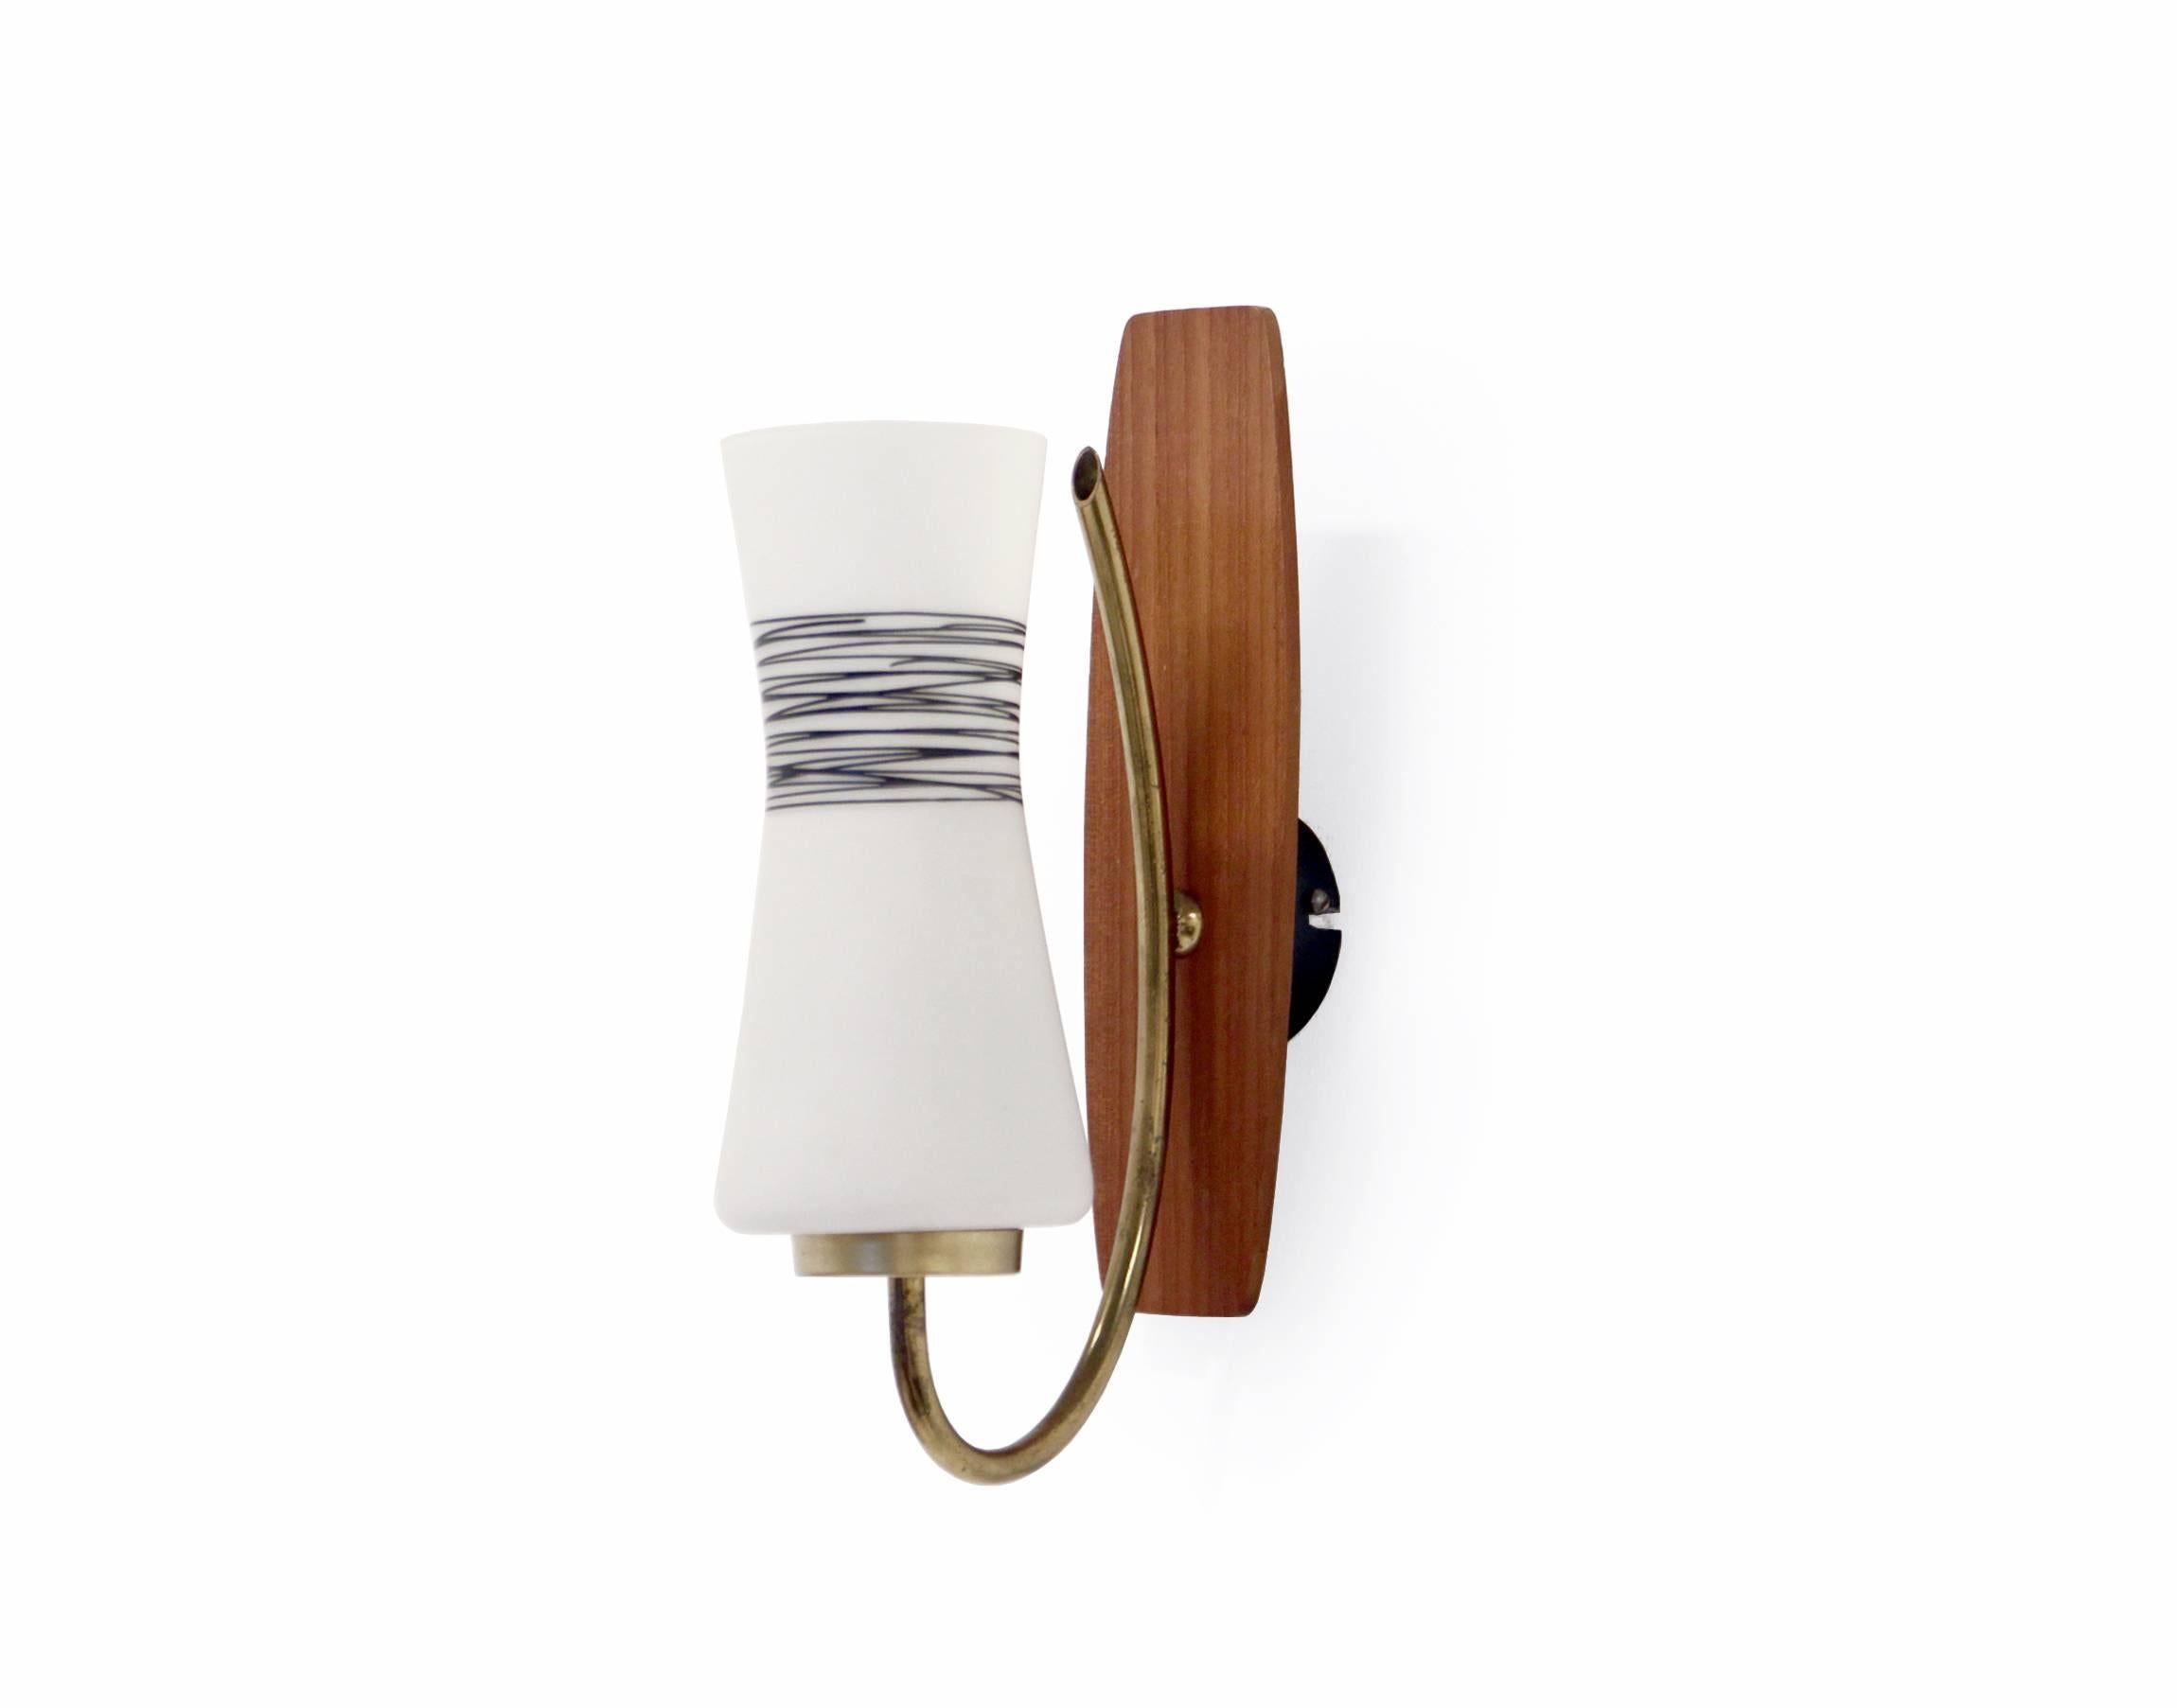 Beautiful set of wall lights on a teak and brass frame. Opaline glass shade with a minimalist surface decoration.

Designed and made in Norway by Garder Lys AS from, circa 1960 second half.

Both lamps are fully working and in good vintage